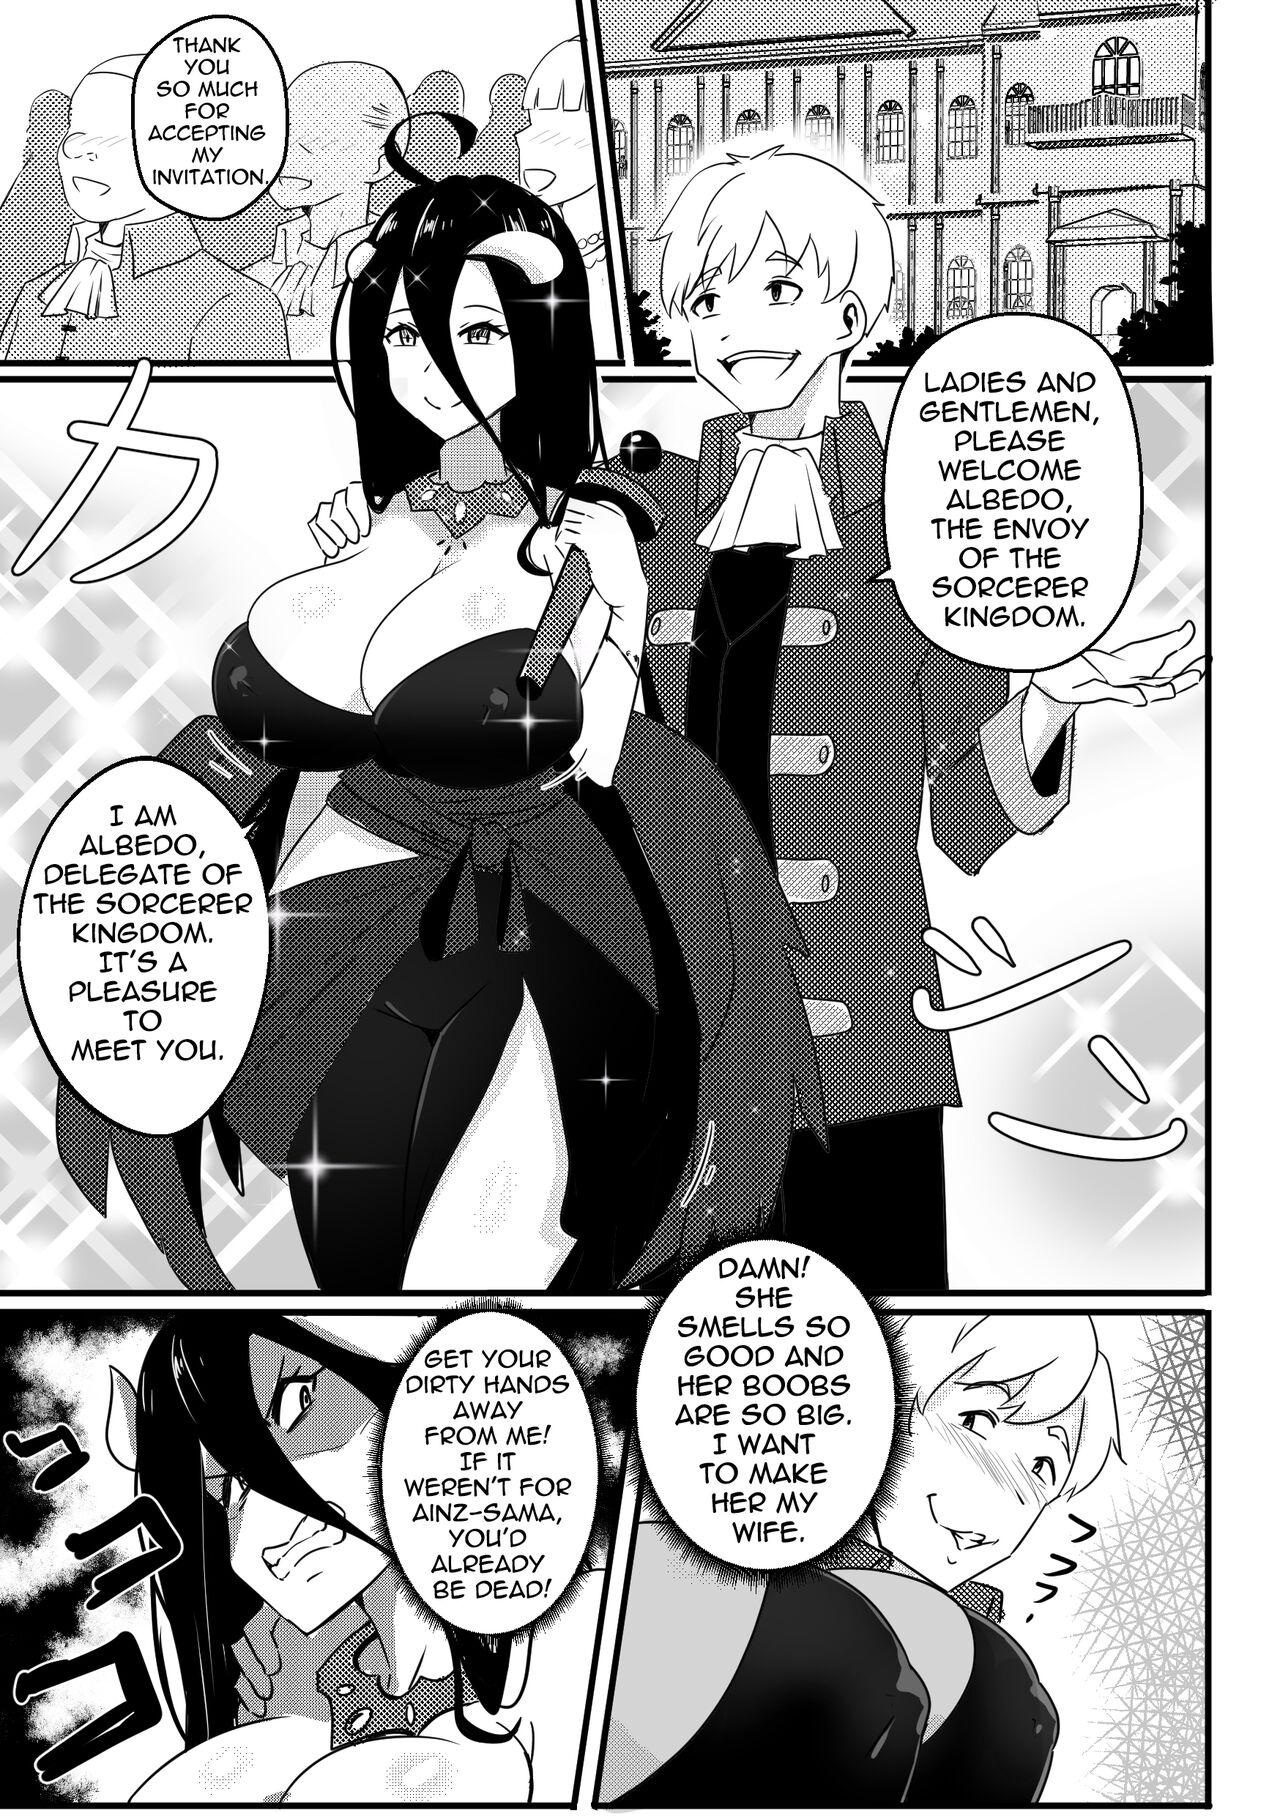 Stepbrother [Merkonig] B-Trayal 40 Albedo (Overlord) Censored [English] - Overlord Blowing - Picture 2